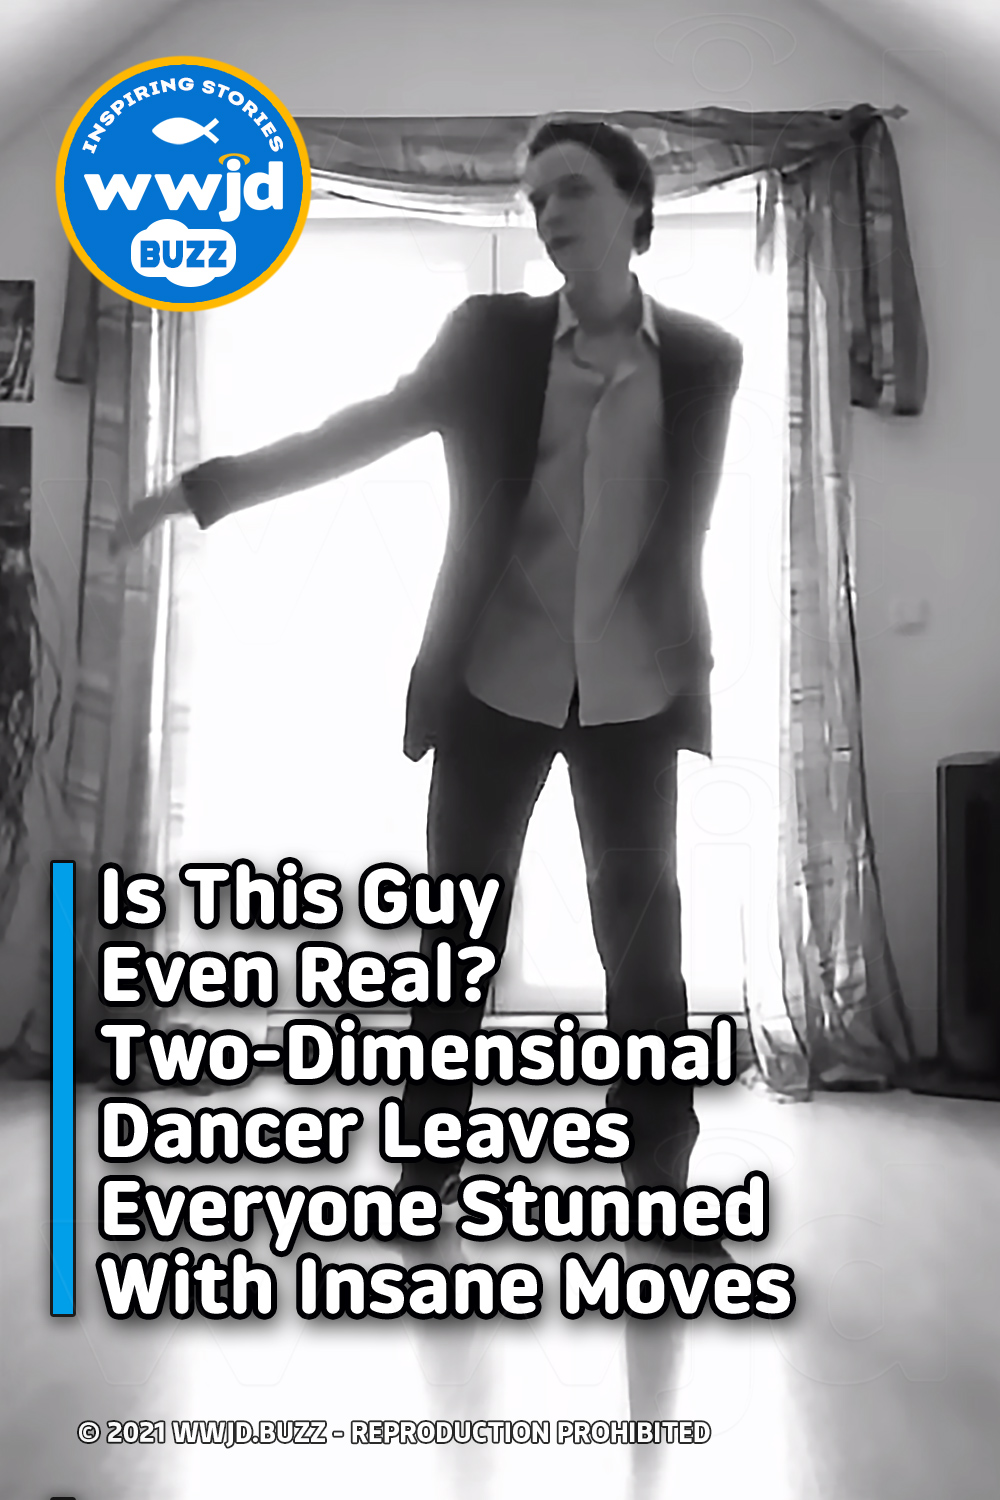 Is This Guy Even Real? Two-Dimensional Dancer Leaves Everyone Stunned With Insane Moves